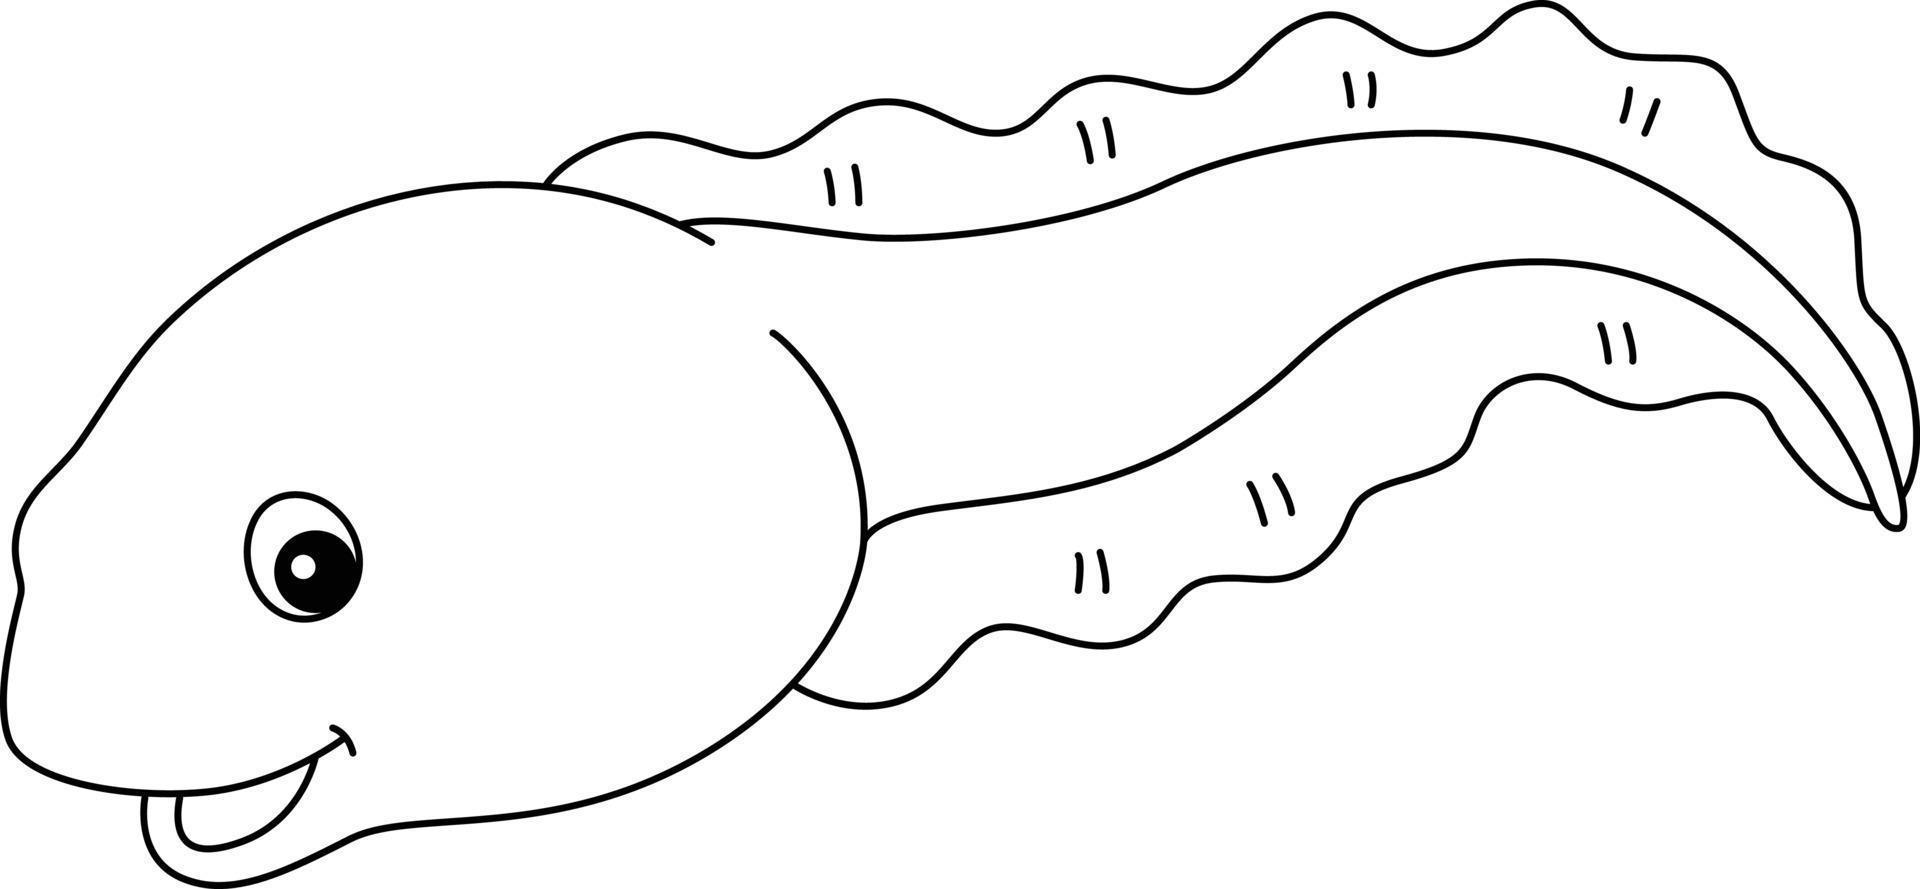 Tadpole Animal Isolated Coloring Page for Kids vector